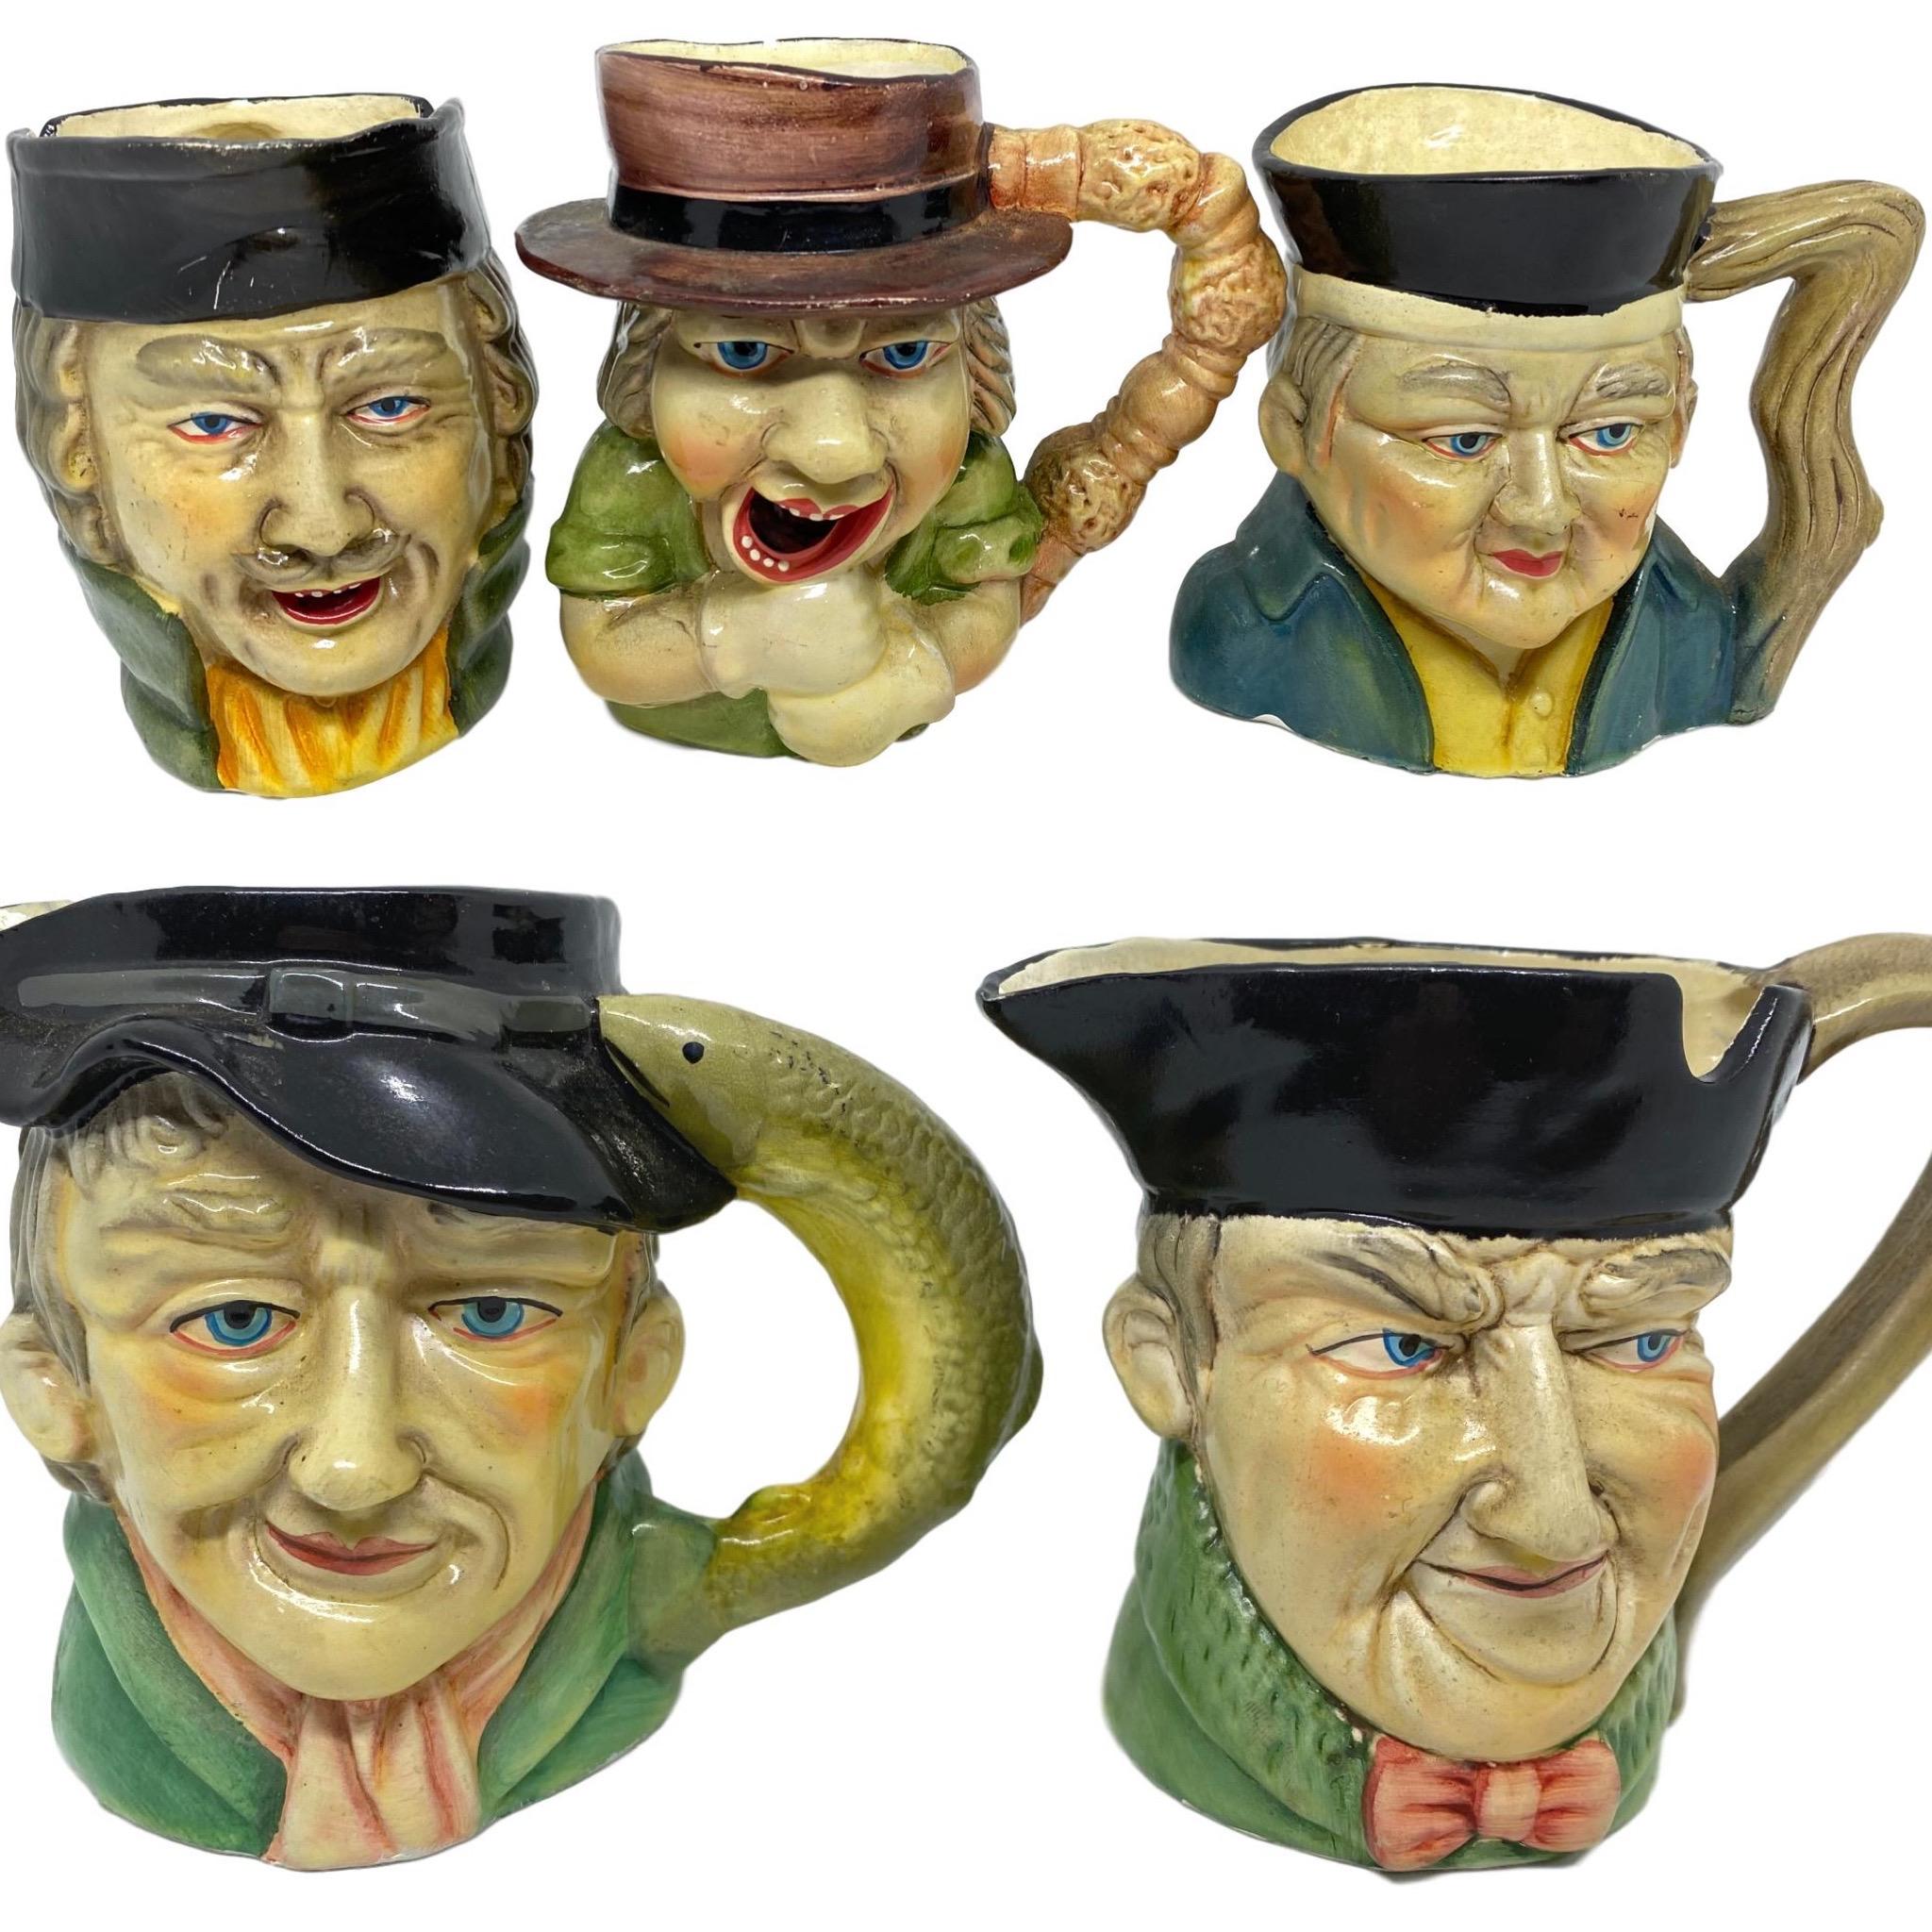 Beautiful collection of five toby mugs or creamer pitchers. Created by an English company. Some decorative Items in original as found condition. Measures: Tallest is approximate 3 1/2